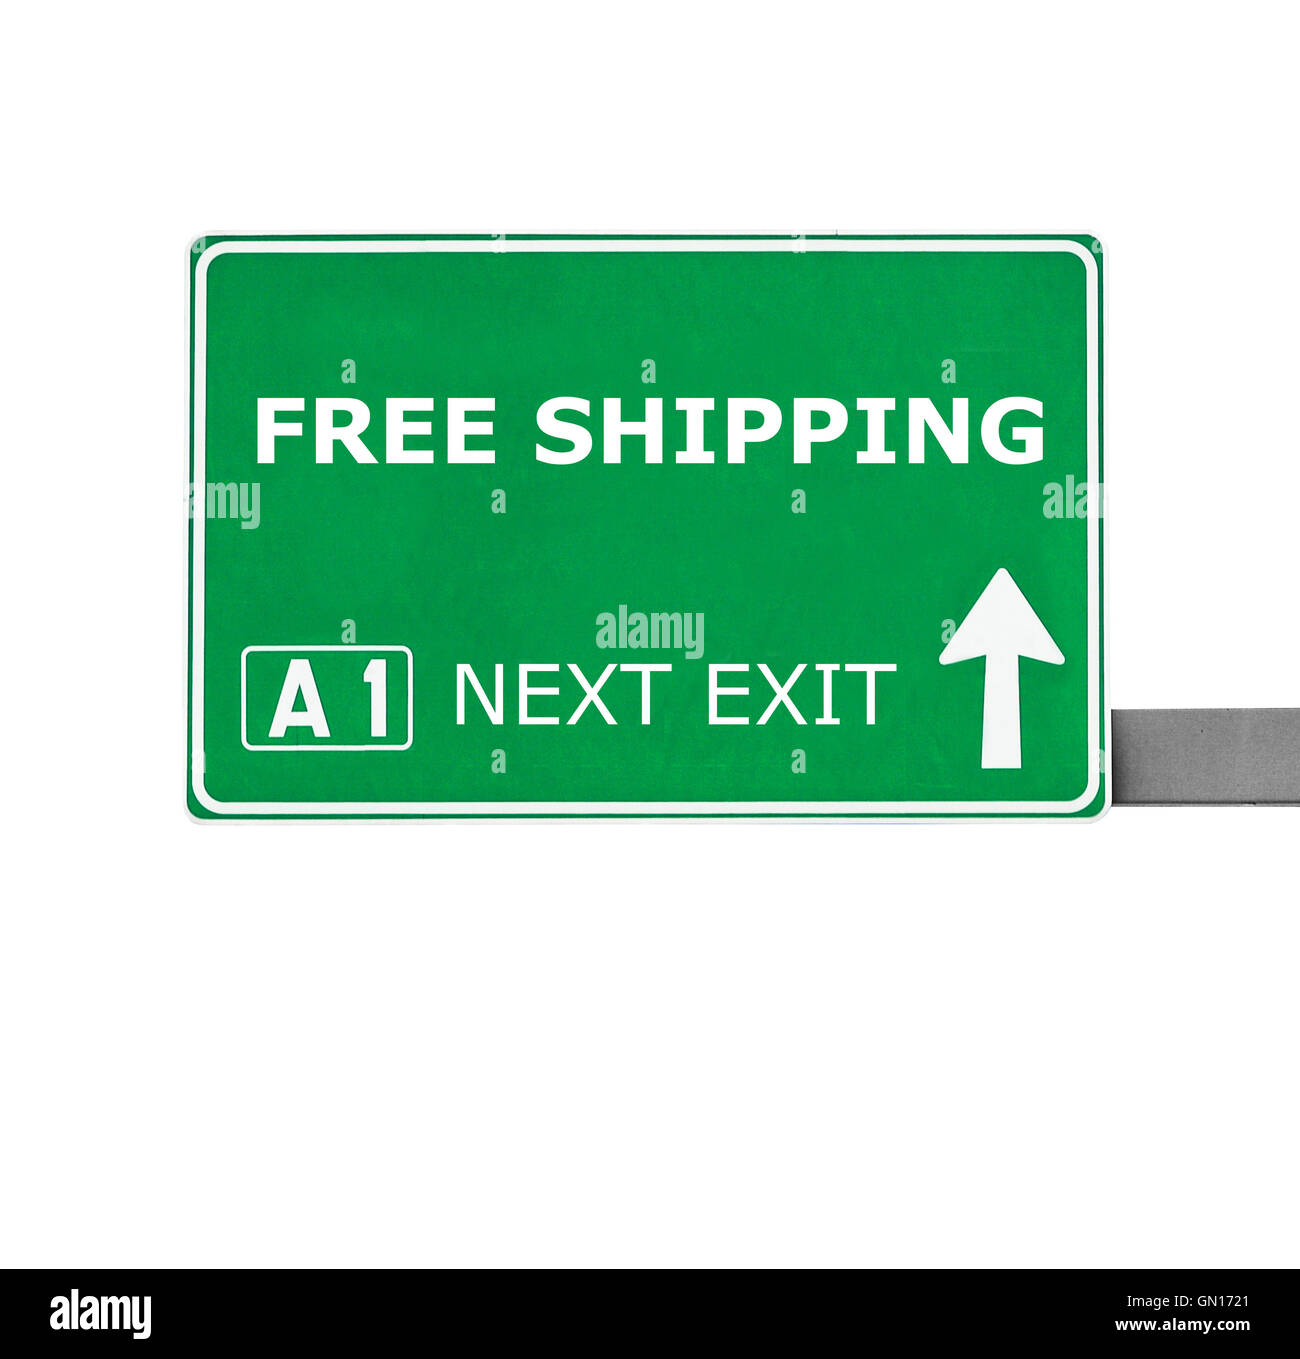 FREE SHIPPING road sign isolated on white Stock Photo